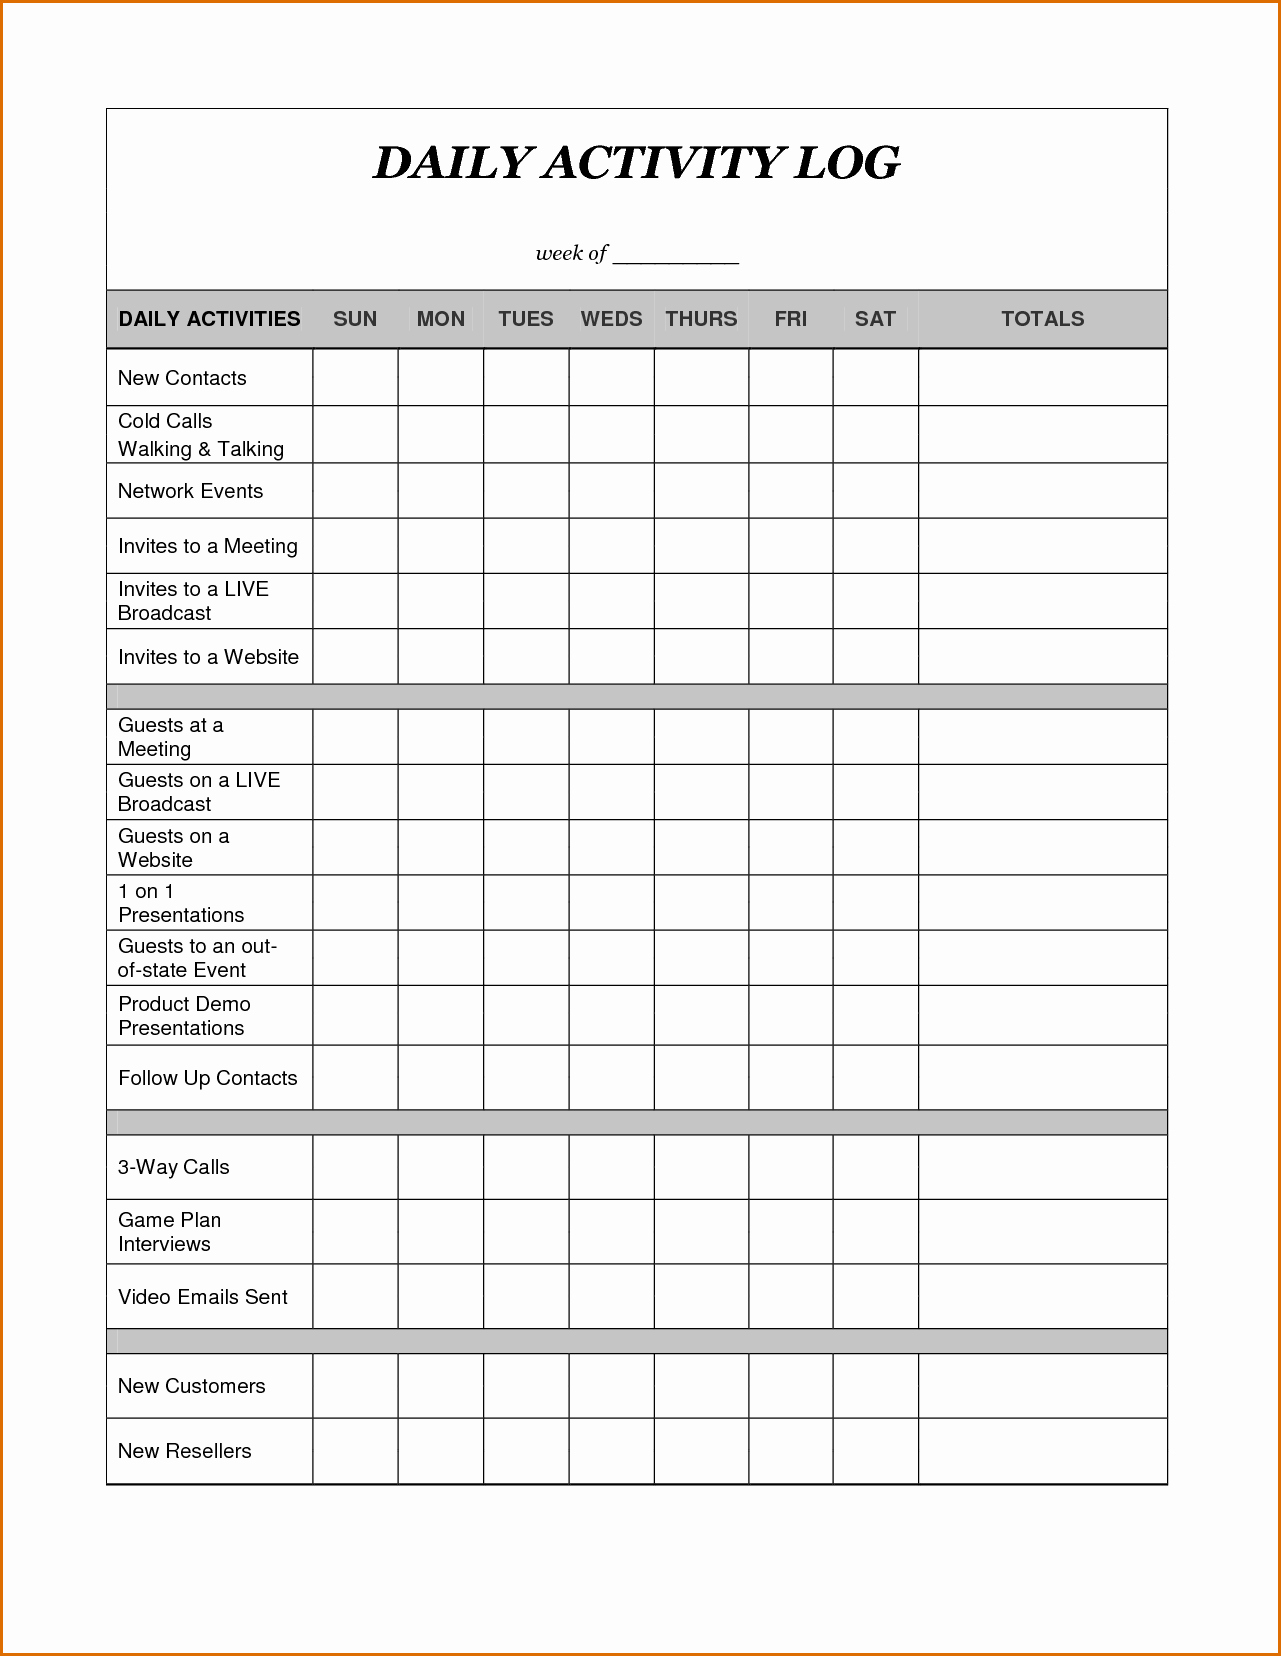 Daily Activity Log Template Excel Lovely 8 Daily Activity Log Template